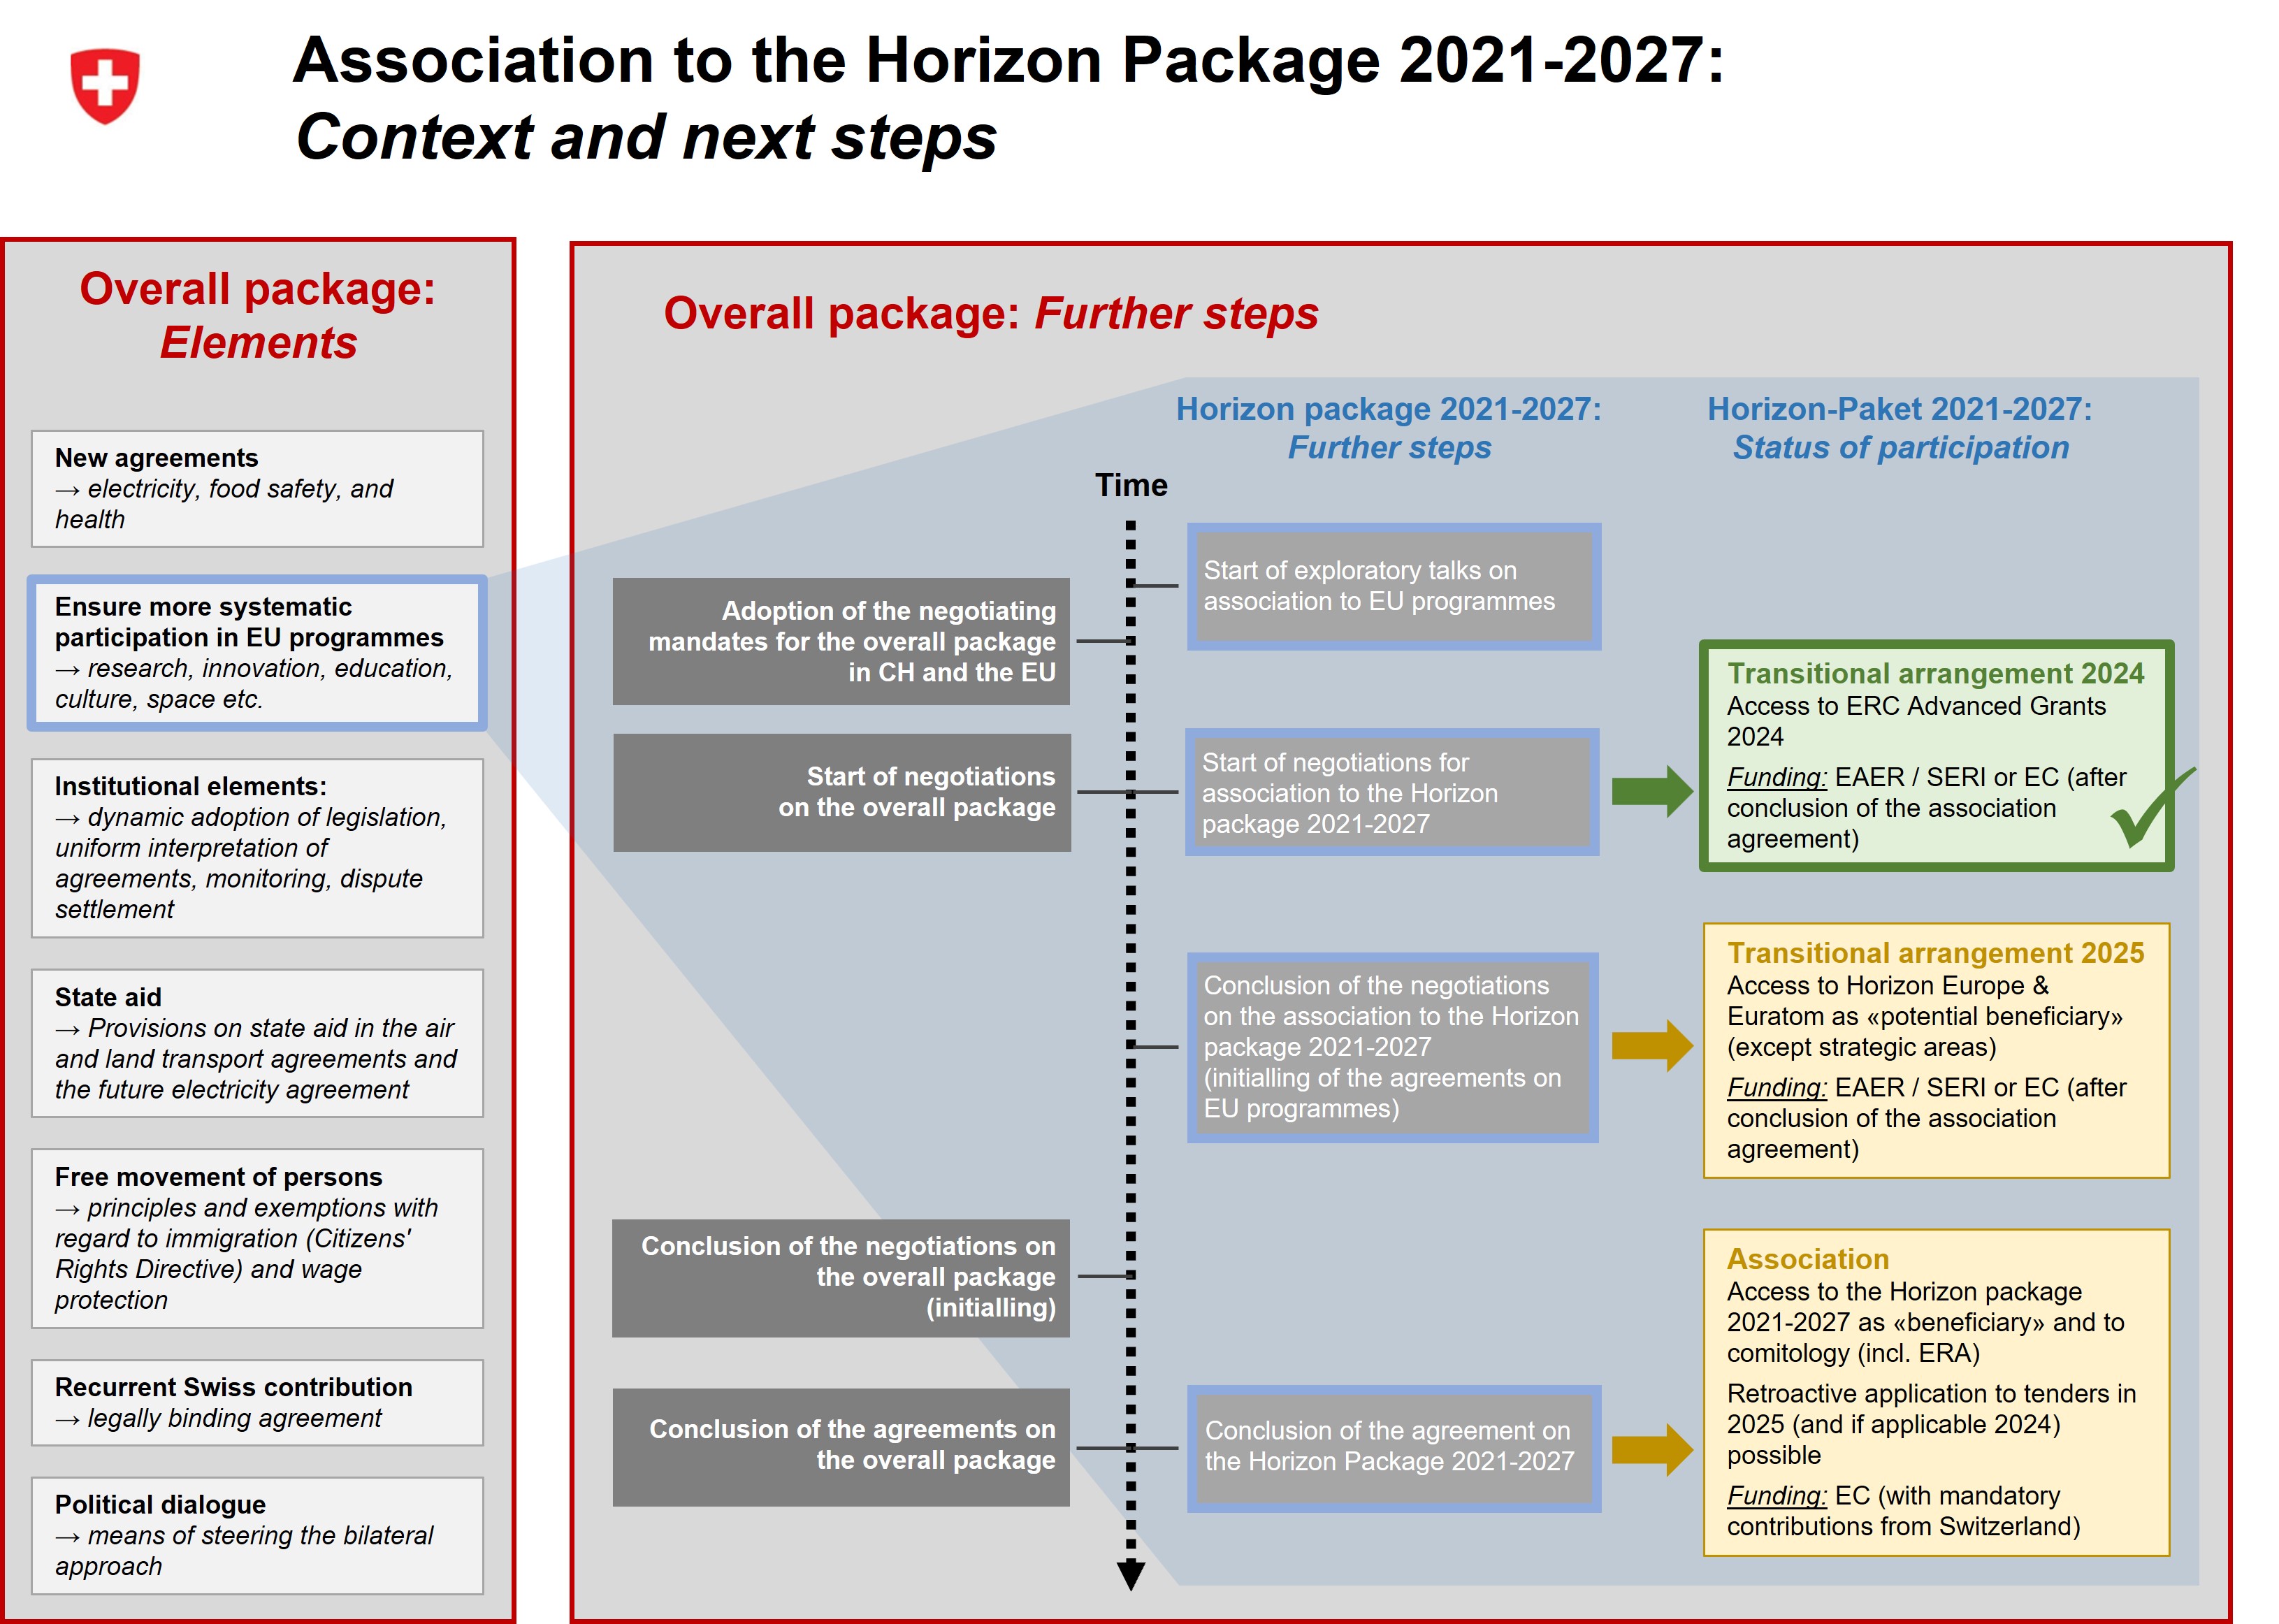 Association to the Horizon Package 2021-2027: Context and next steps